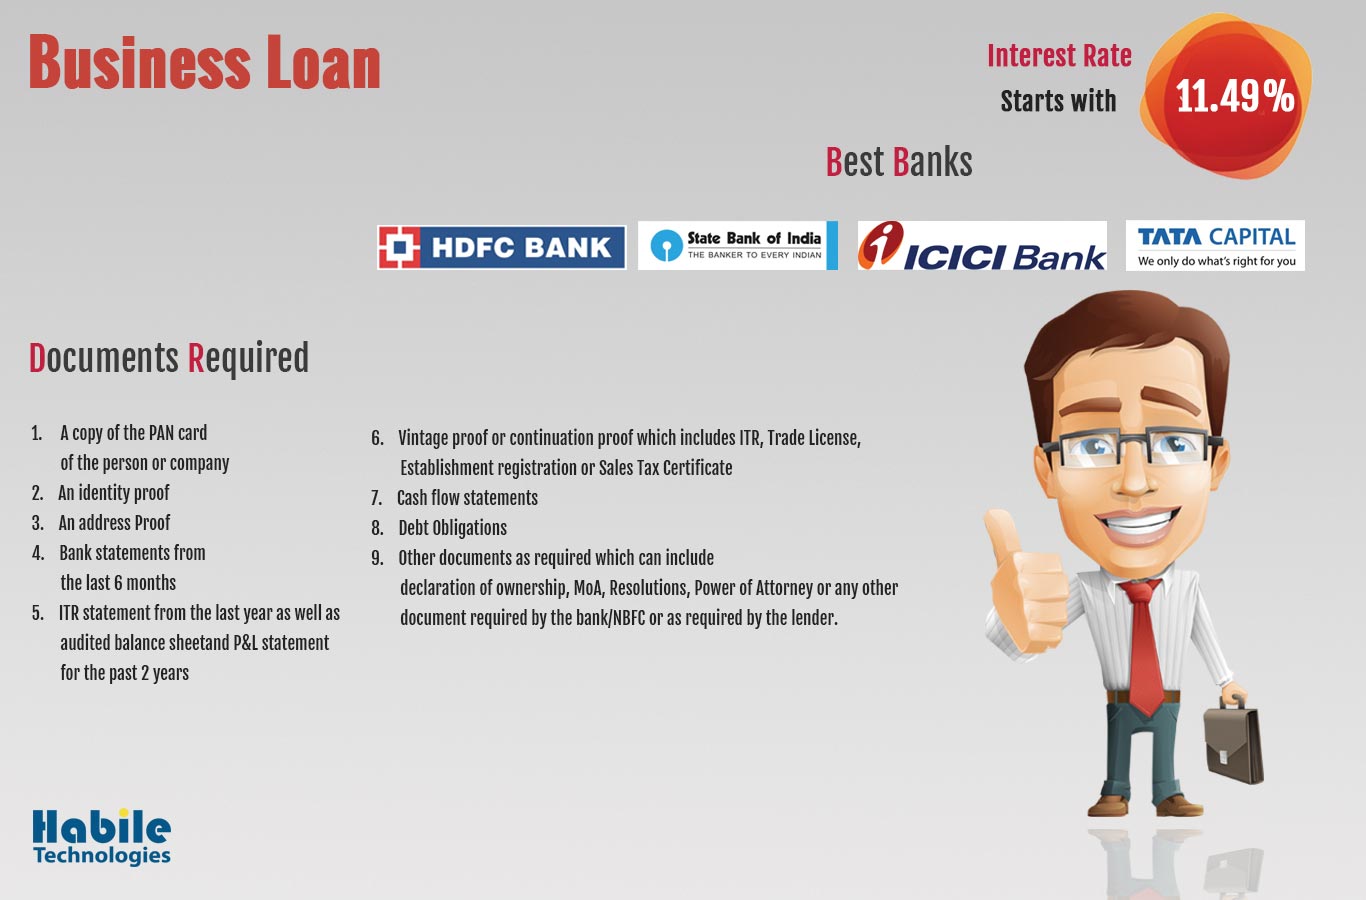 Documents required for Business Loan